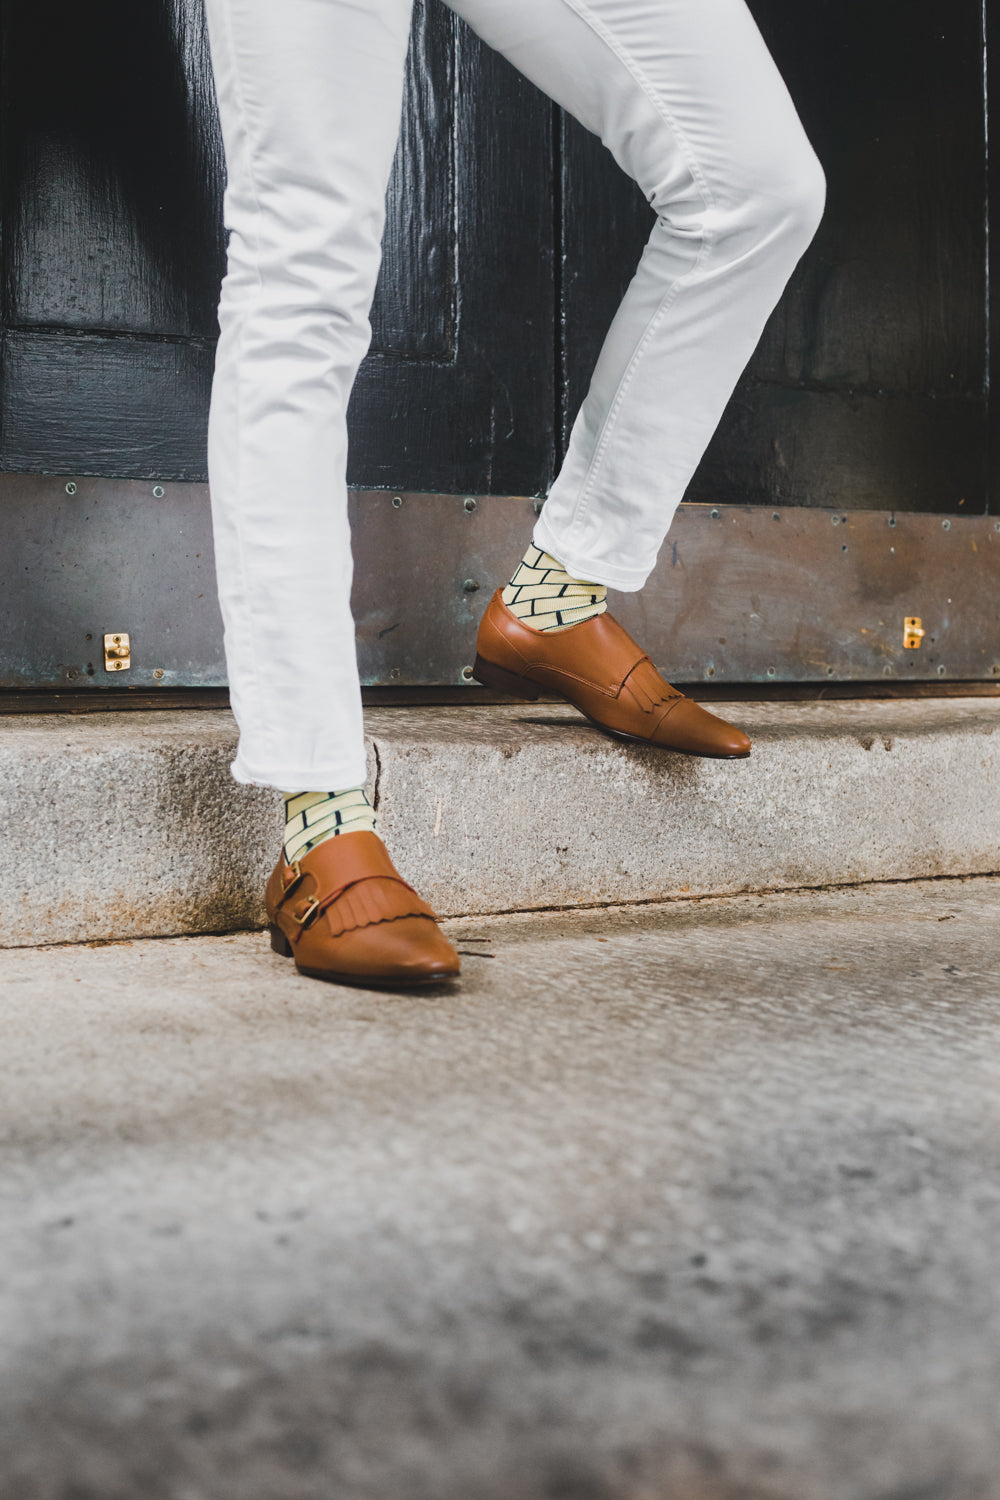 yellow over the calf dress socks with black brick line pattern, brown dress shoes, white pants, on a step